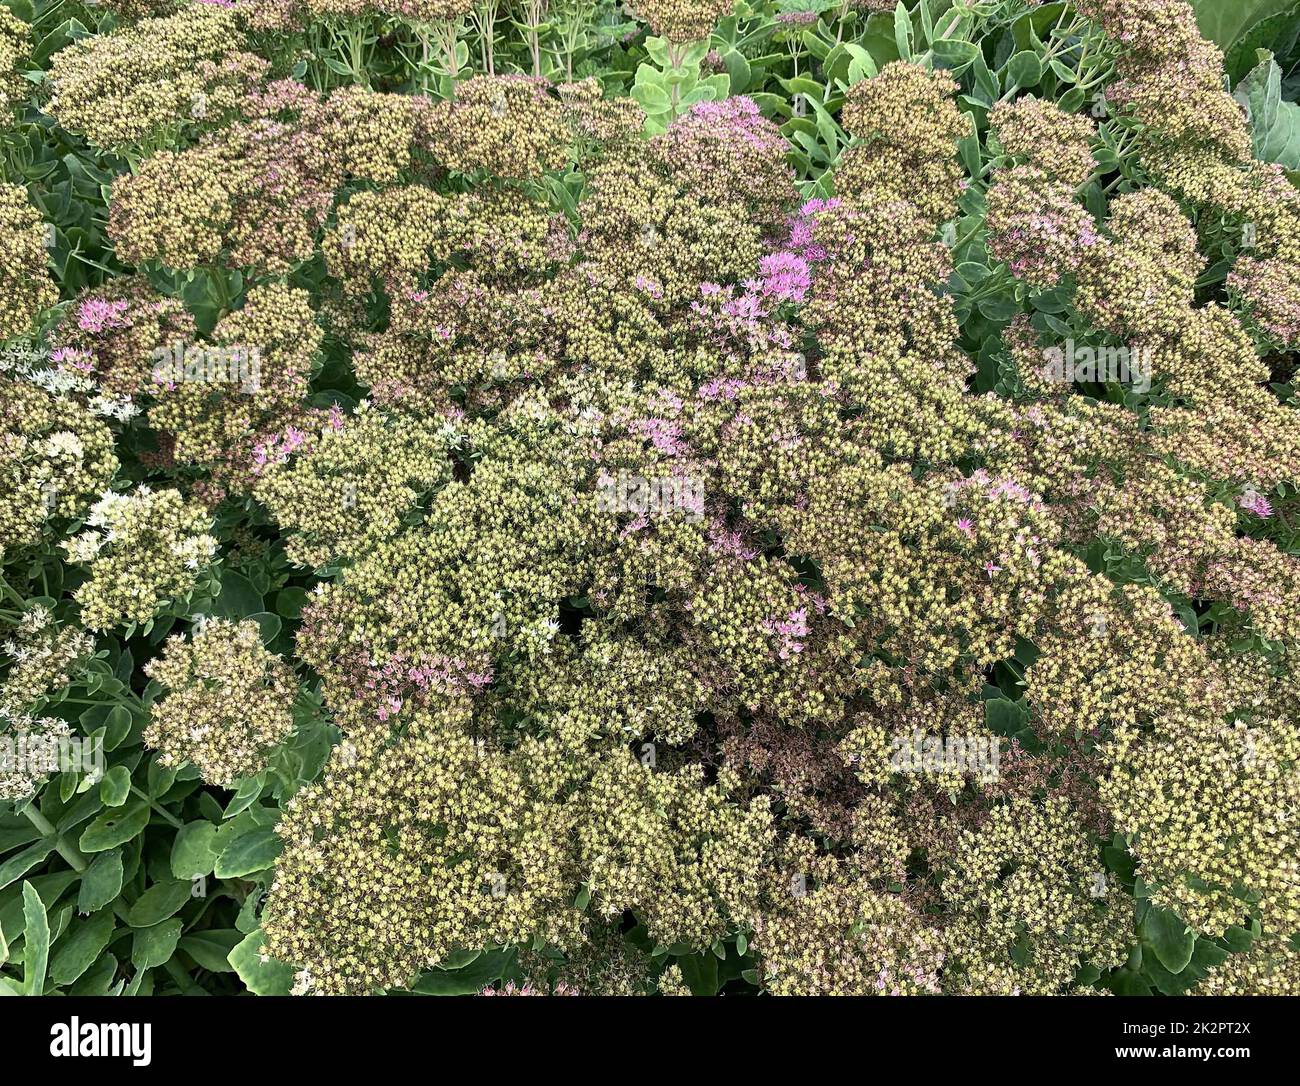 Close up of the clump forming garden perennial plant Sedum spectabile Stardust or ice plant seen with flat-topped white flower heads. Stock Photo